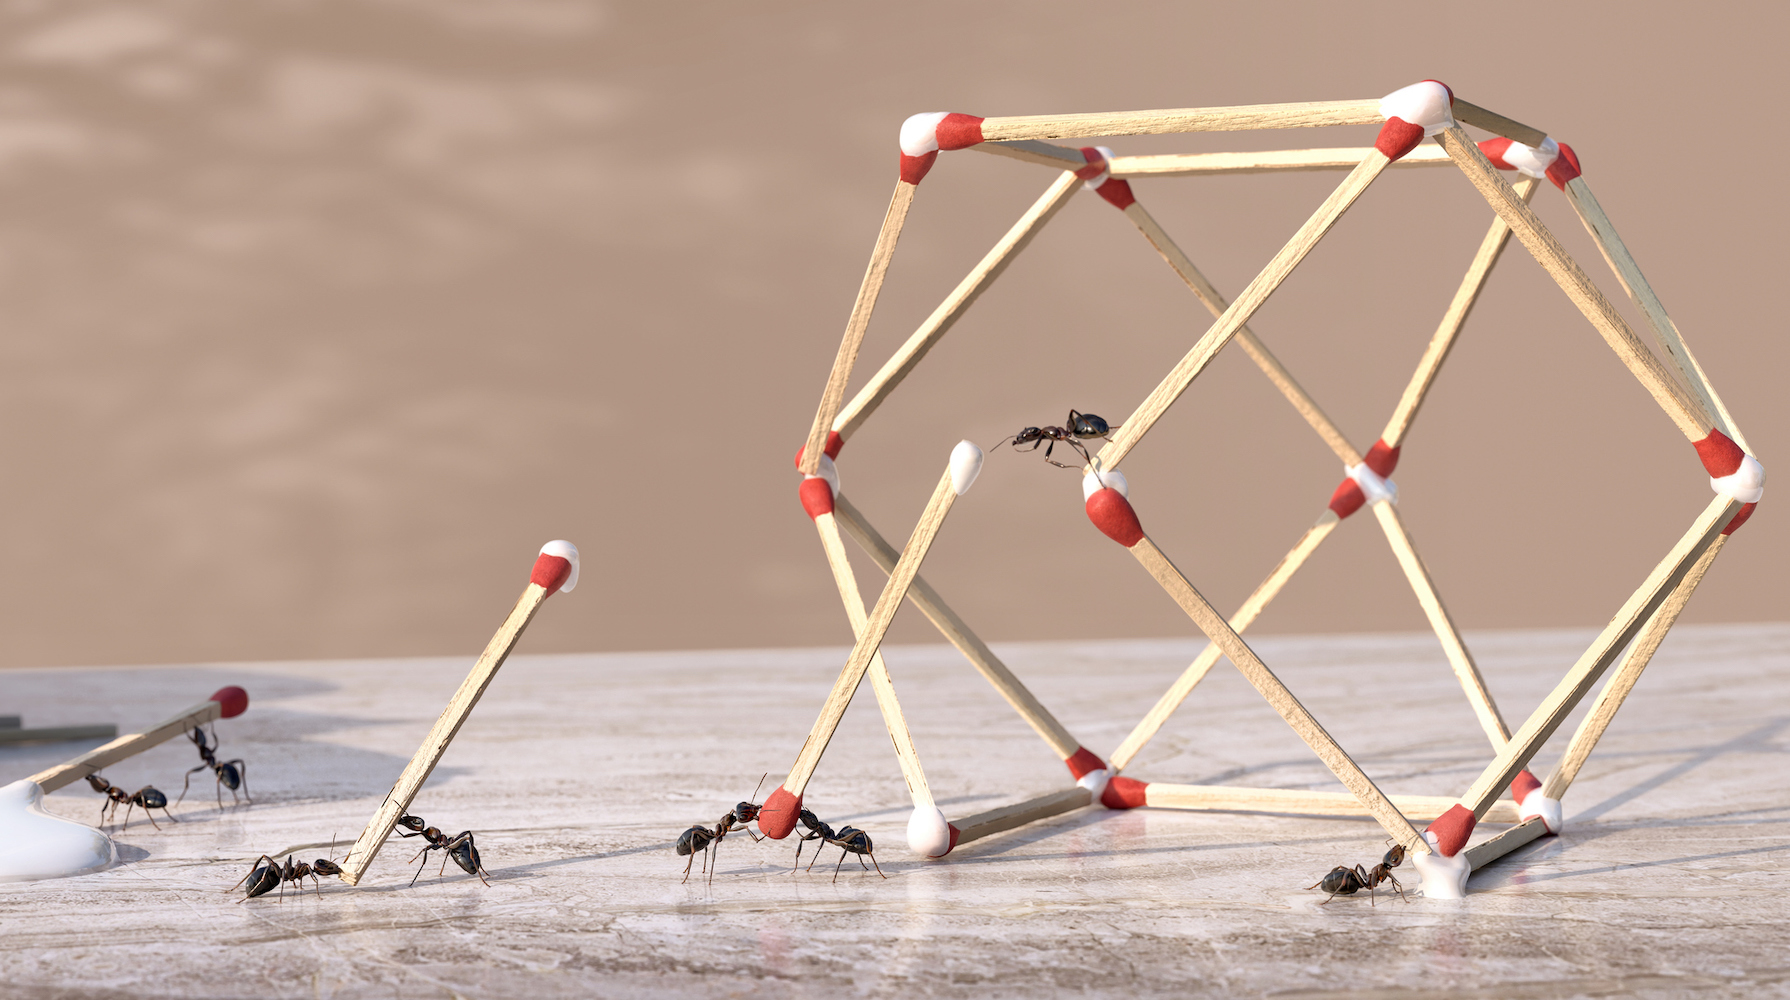 A group of ants working as a team to form a three dimensional geometric sculpture from glue and matchsticks. The ants are dip ends of matchsticks in glue dripping from a bottle of glue and place in position to form the shape on a marble worktop.